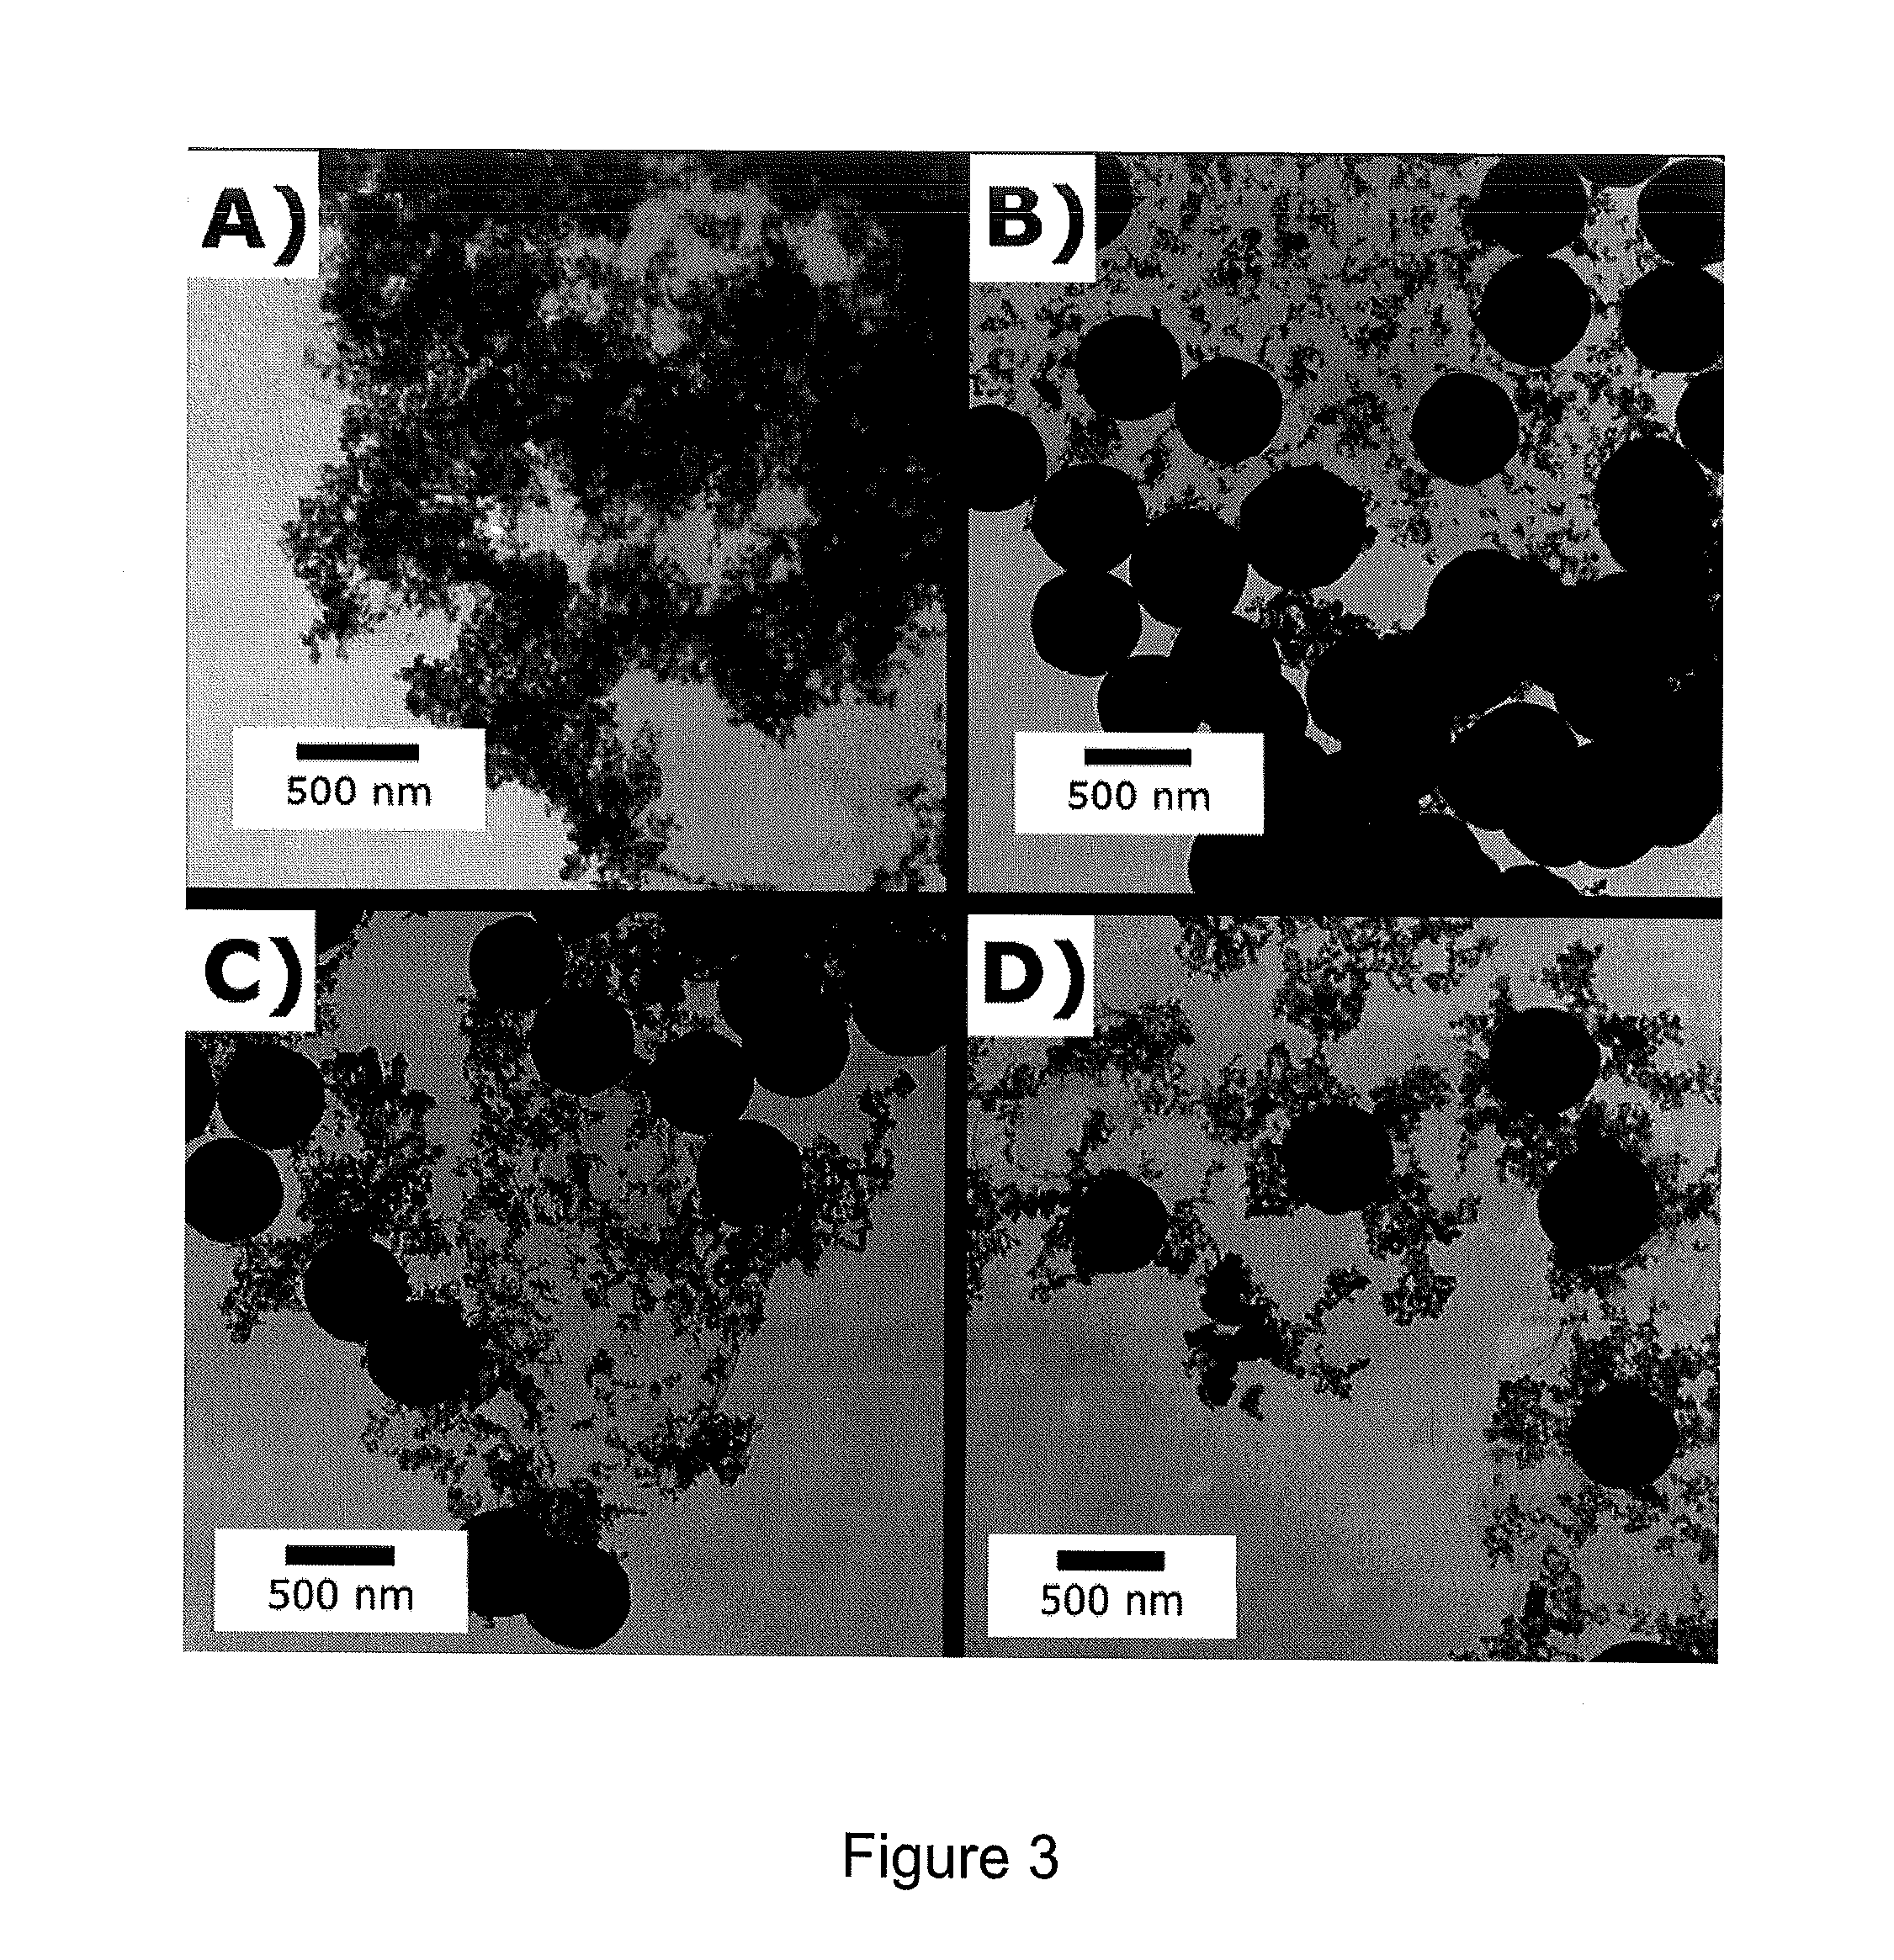 Method and apparatus for producing recyclable photocatalytic particulates